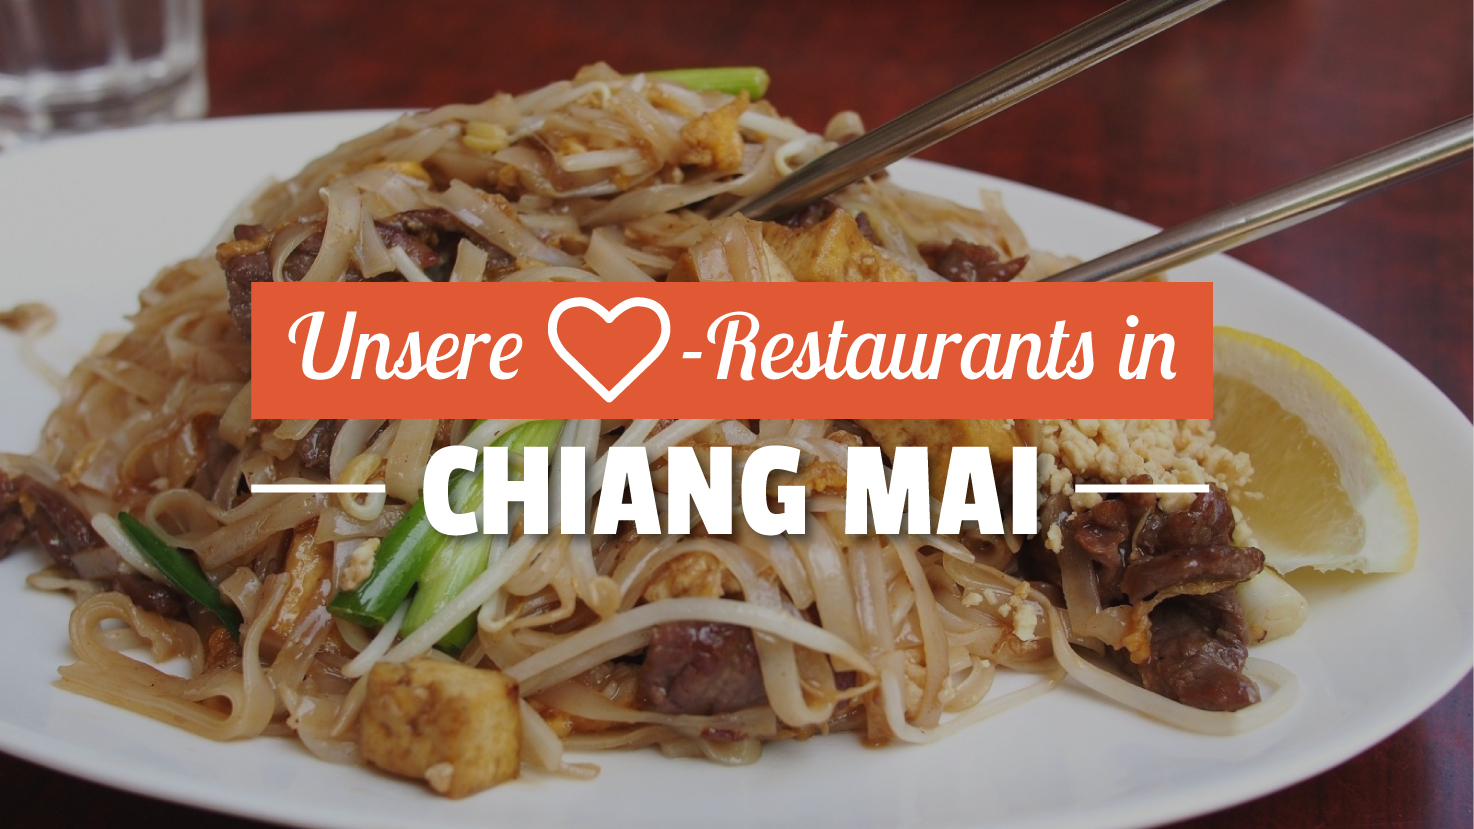 Unsere Lieblings-Restaurants in Chiang Mai